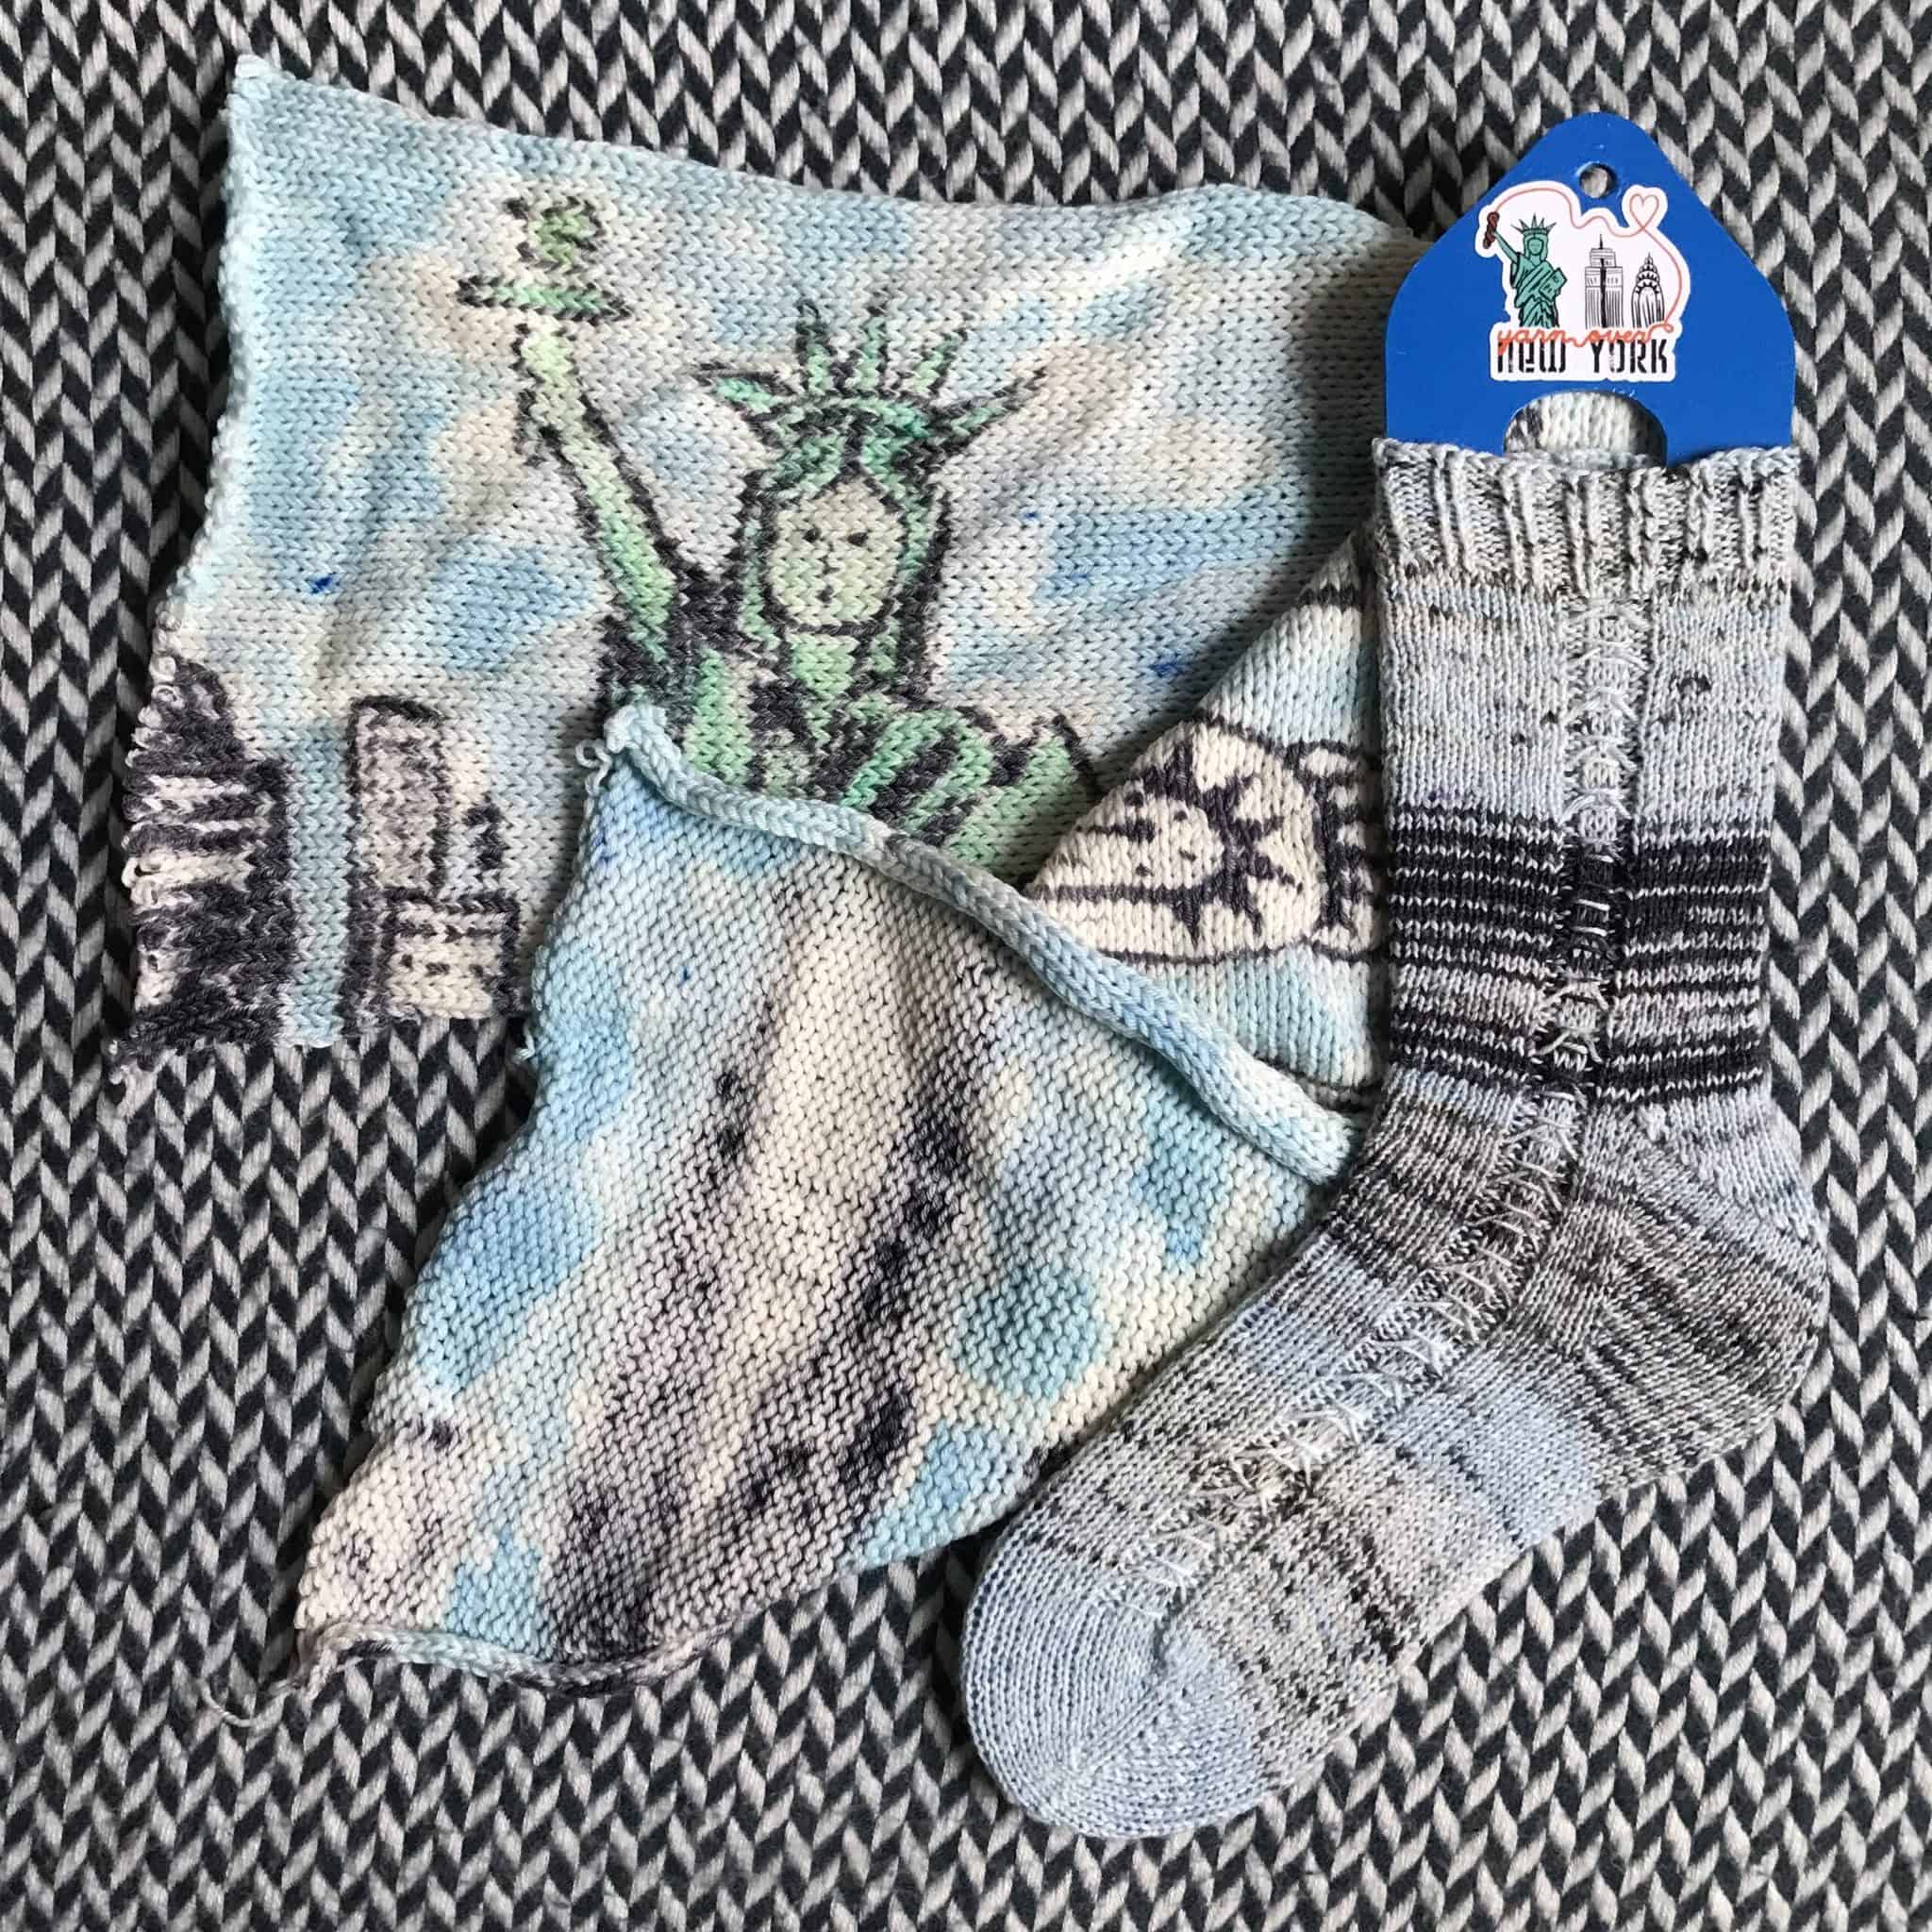 The Statue of Liberty and the NYC skyline on a piece of blue knitting. 